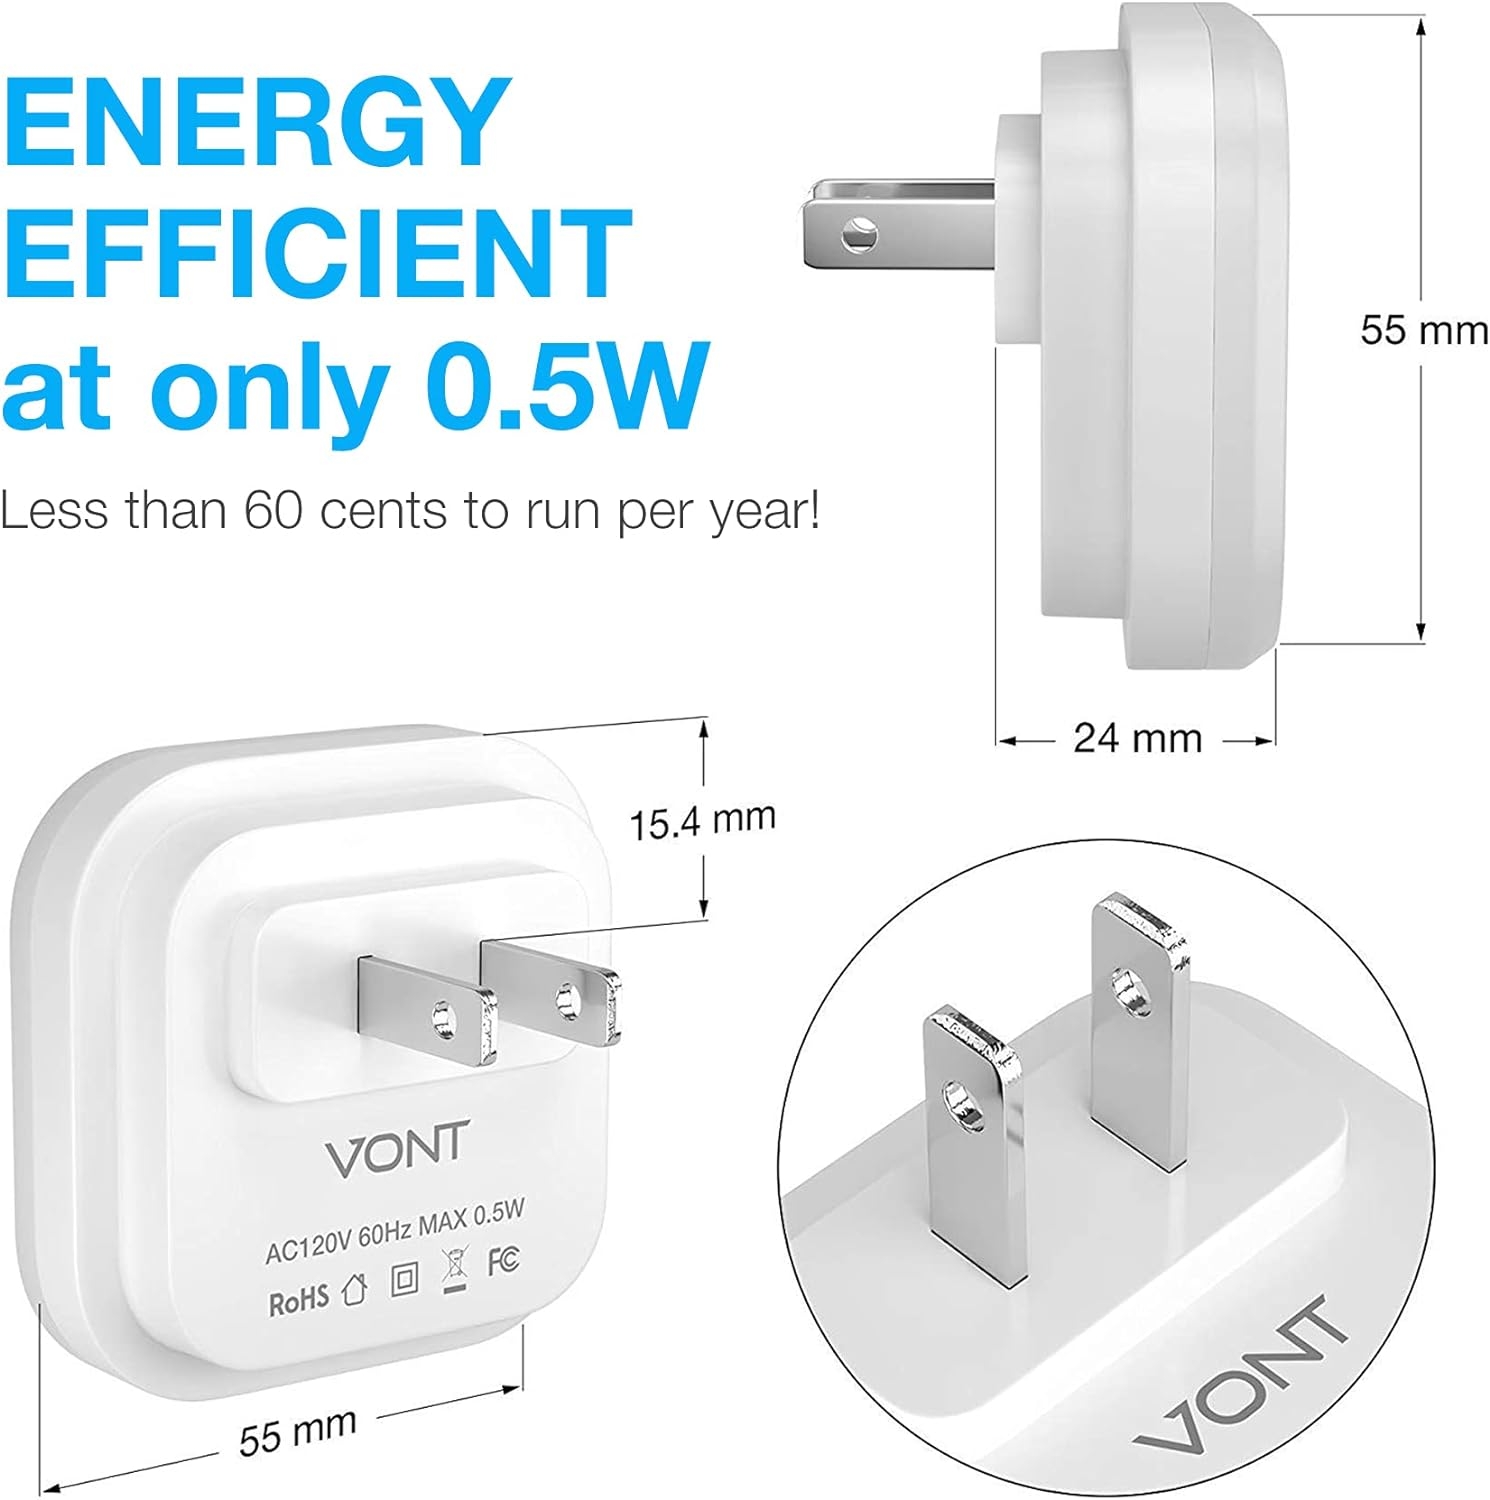 Vont 'Lyra' LED Night Light, Plug-in [6 Pack] Super Smart Dusk to Dawn Sensor, Night Lights Suitable for Bedroom, Bathroom, Toilet,Stairs,Kitchen,Hallway,Kids,Adults,Compact Nightlight, Cool White